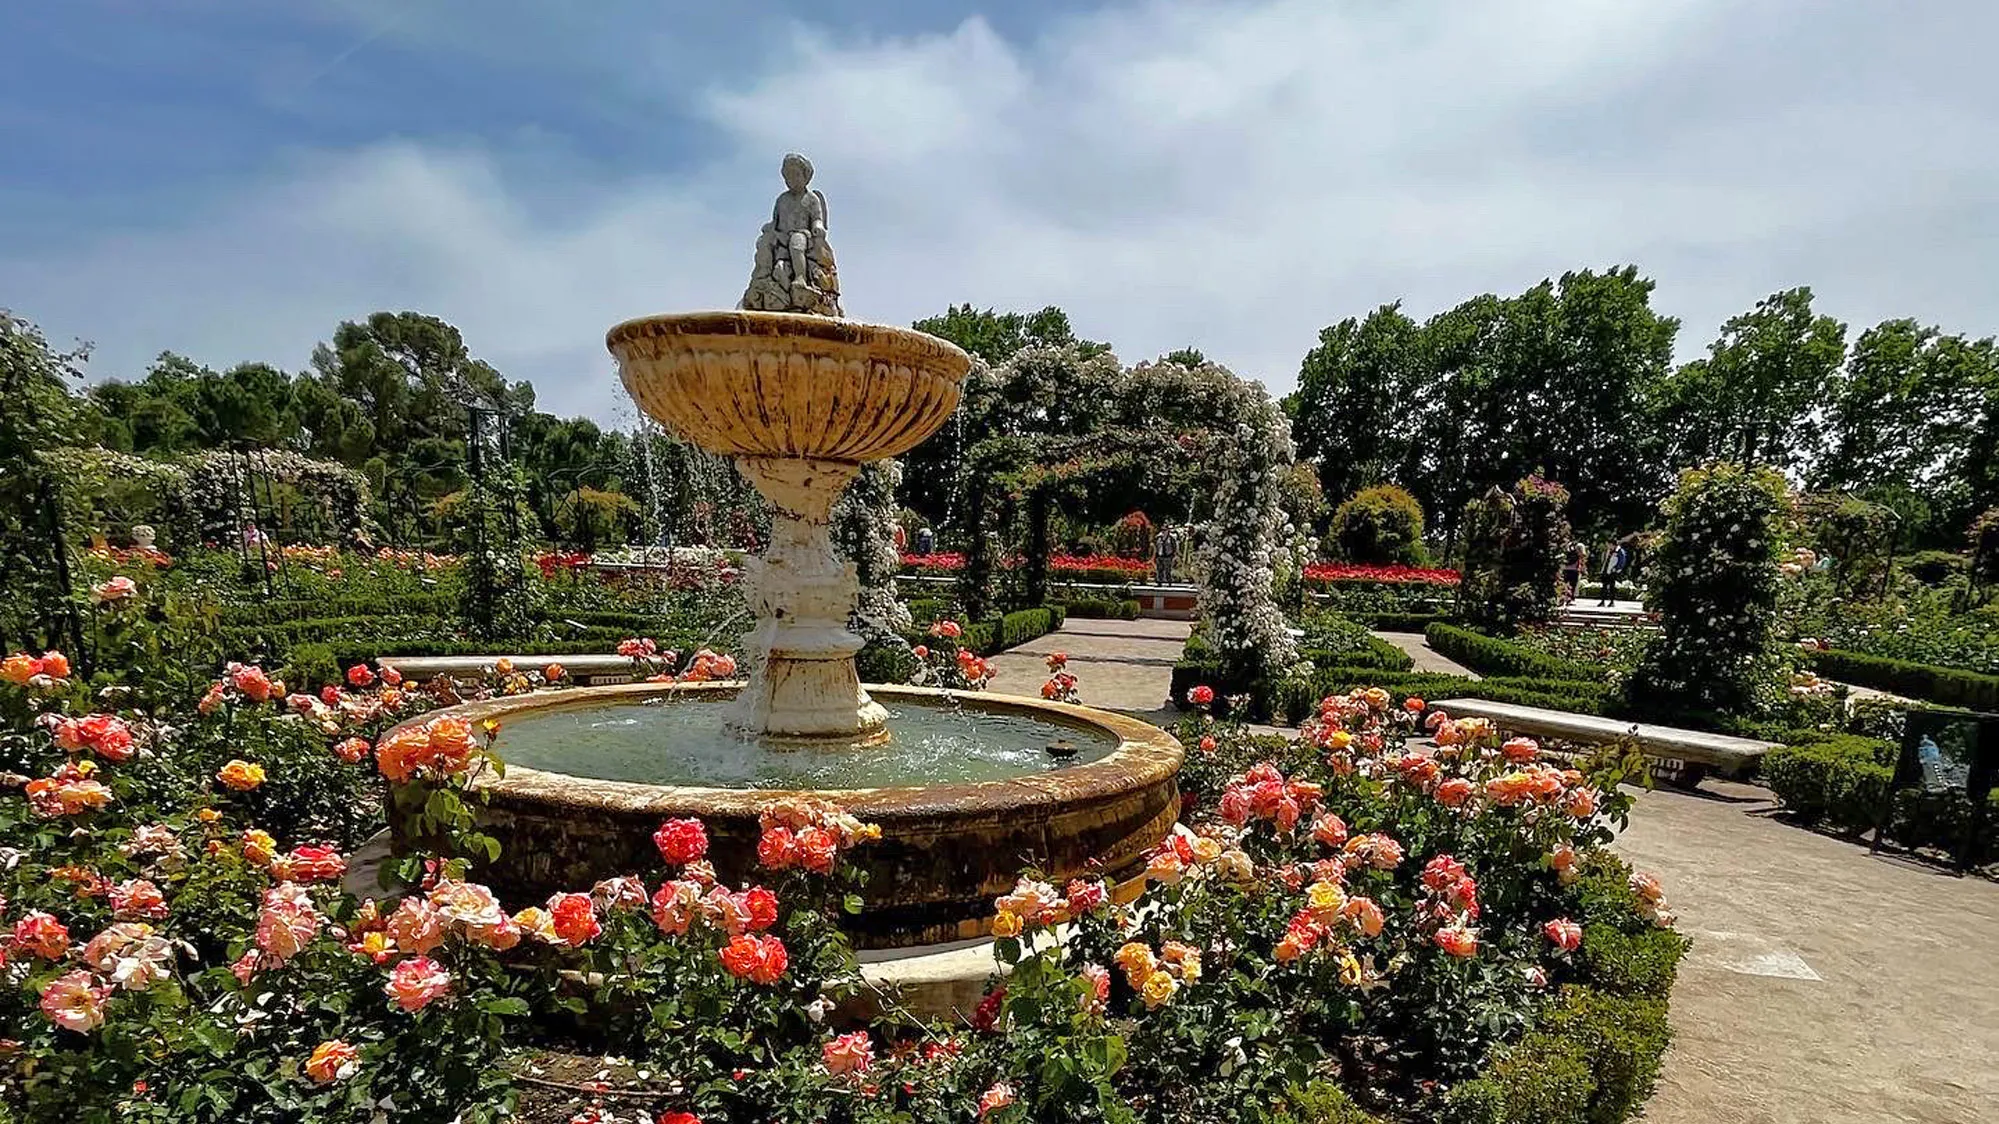 Sun shines on an ornate fountain surrounded by rose bushes, the center of a manicured garden with precisely trimmed bush rows and foliage climbing up arbors. At the top of the fountain is a seated cherub.